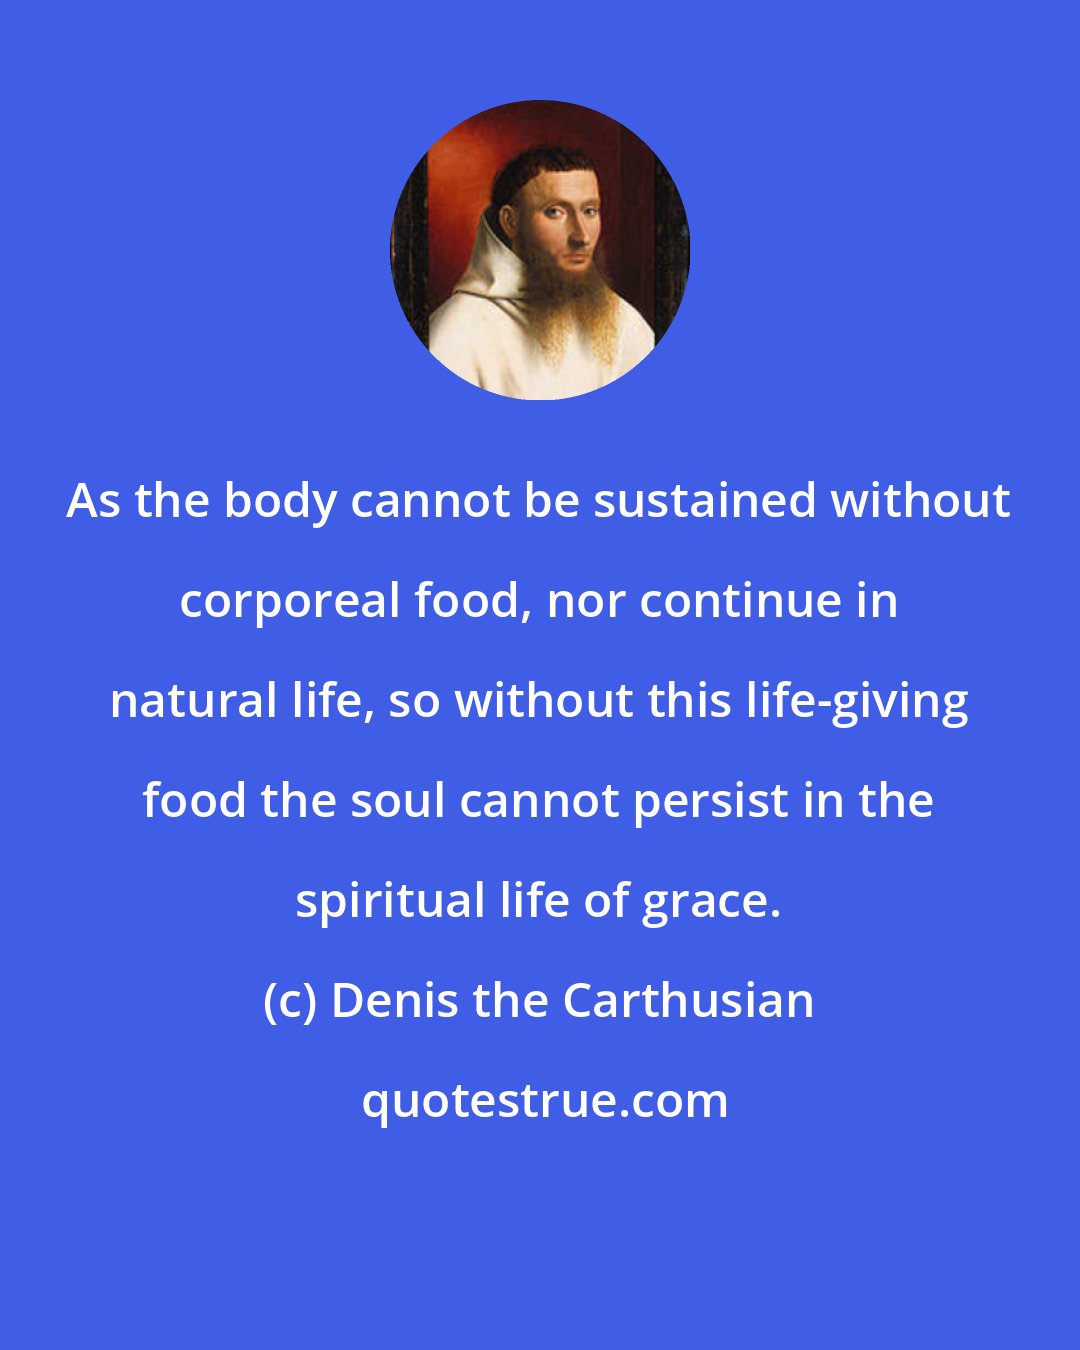 Denis the Carthusian: As the body cannot be sustained without corporeal food, nor continue in natural life, so without this life-giving food the soul cannot persist in the spiritual life of grace.